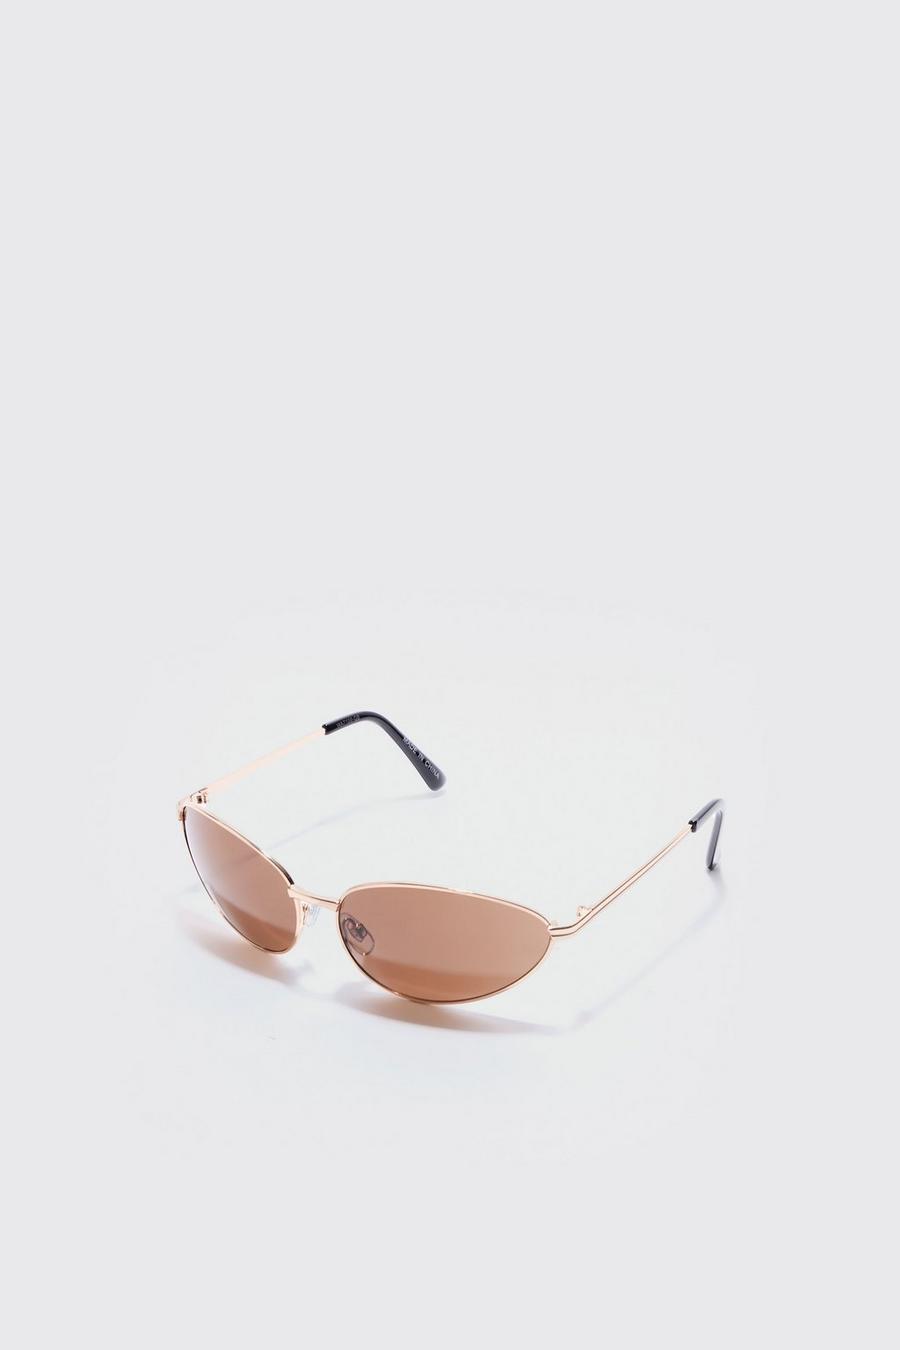 Angled Metal Sunglasses With Brown Lens In Gold